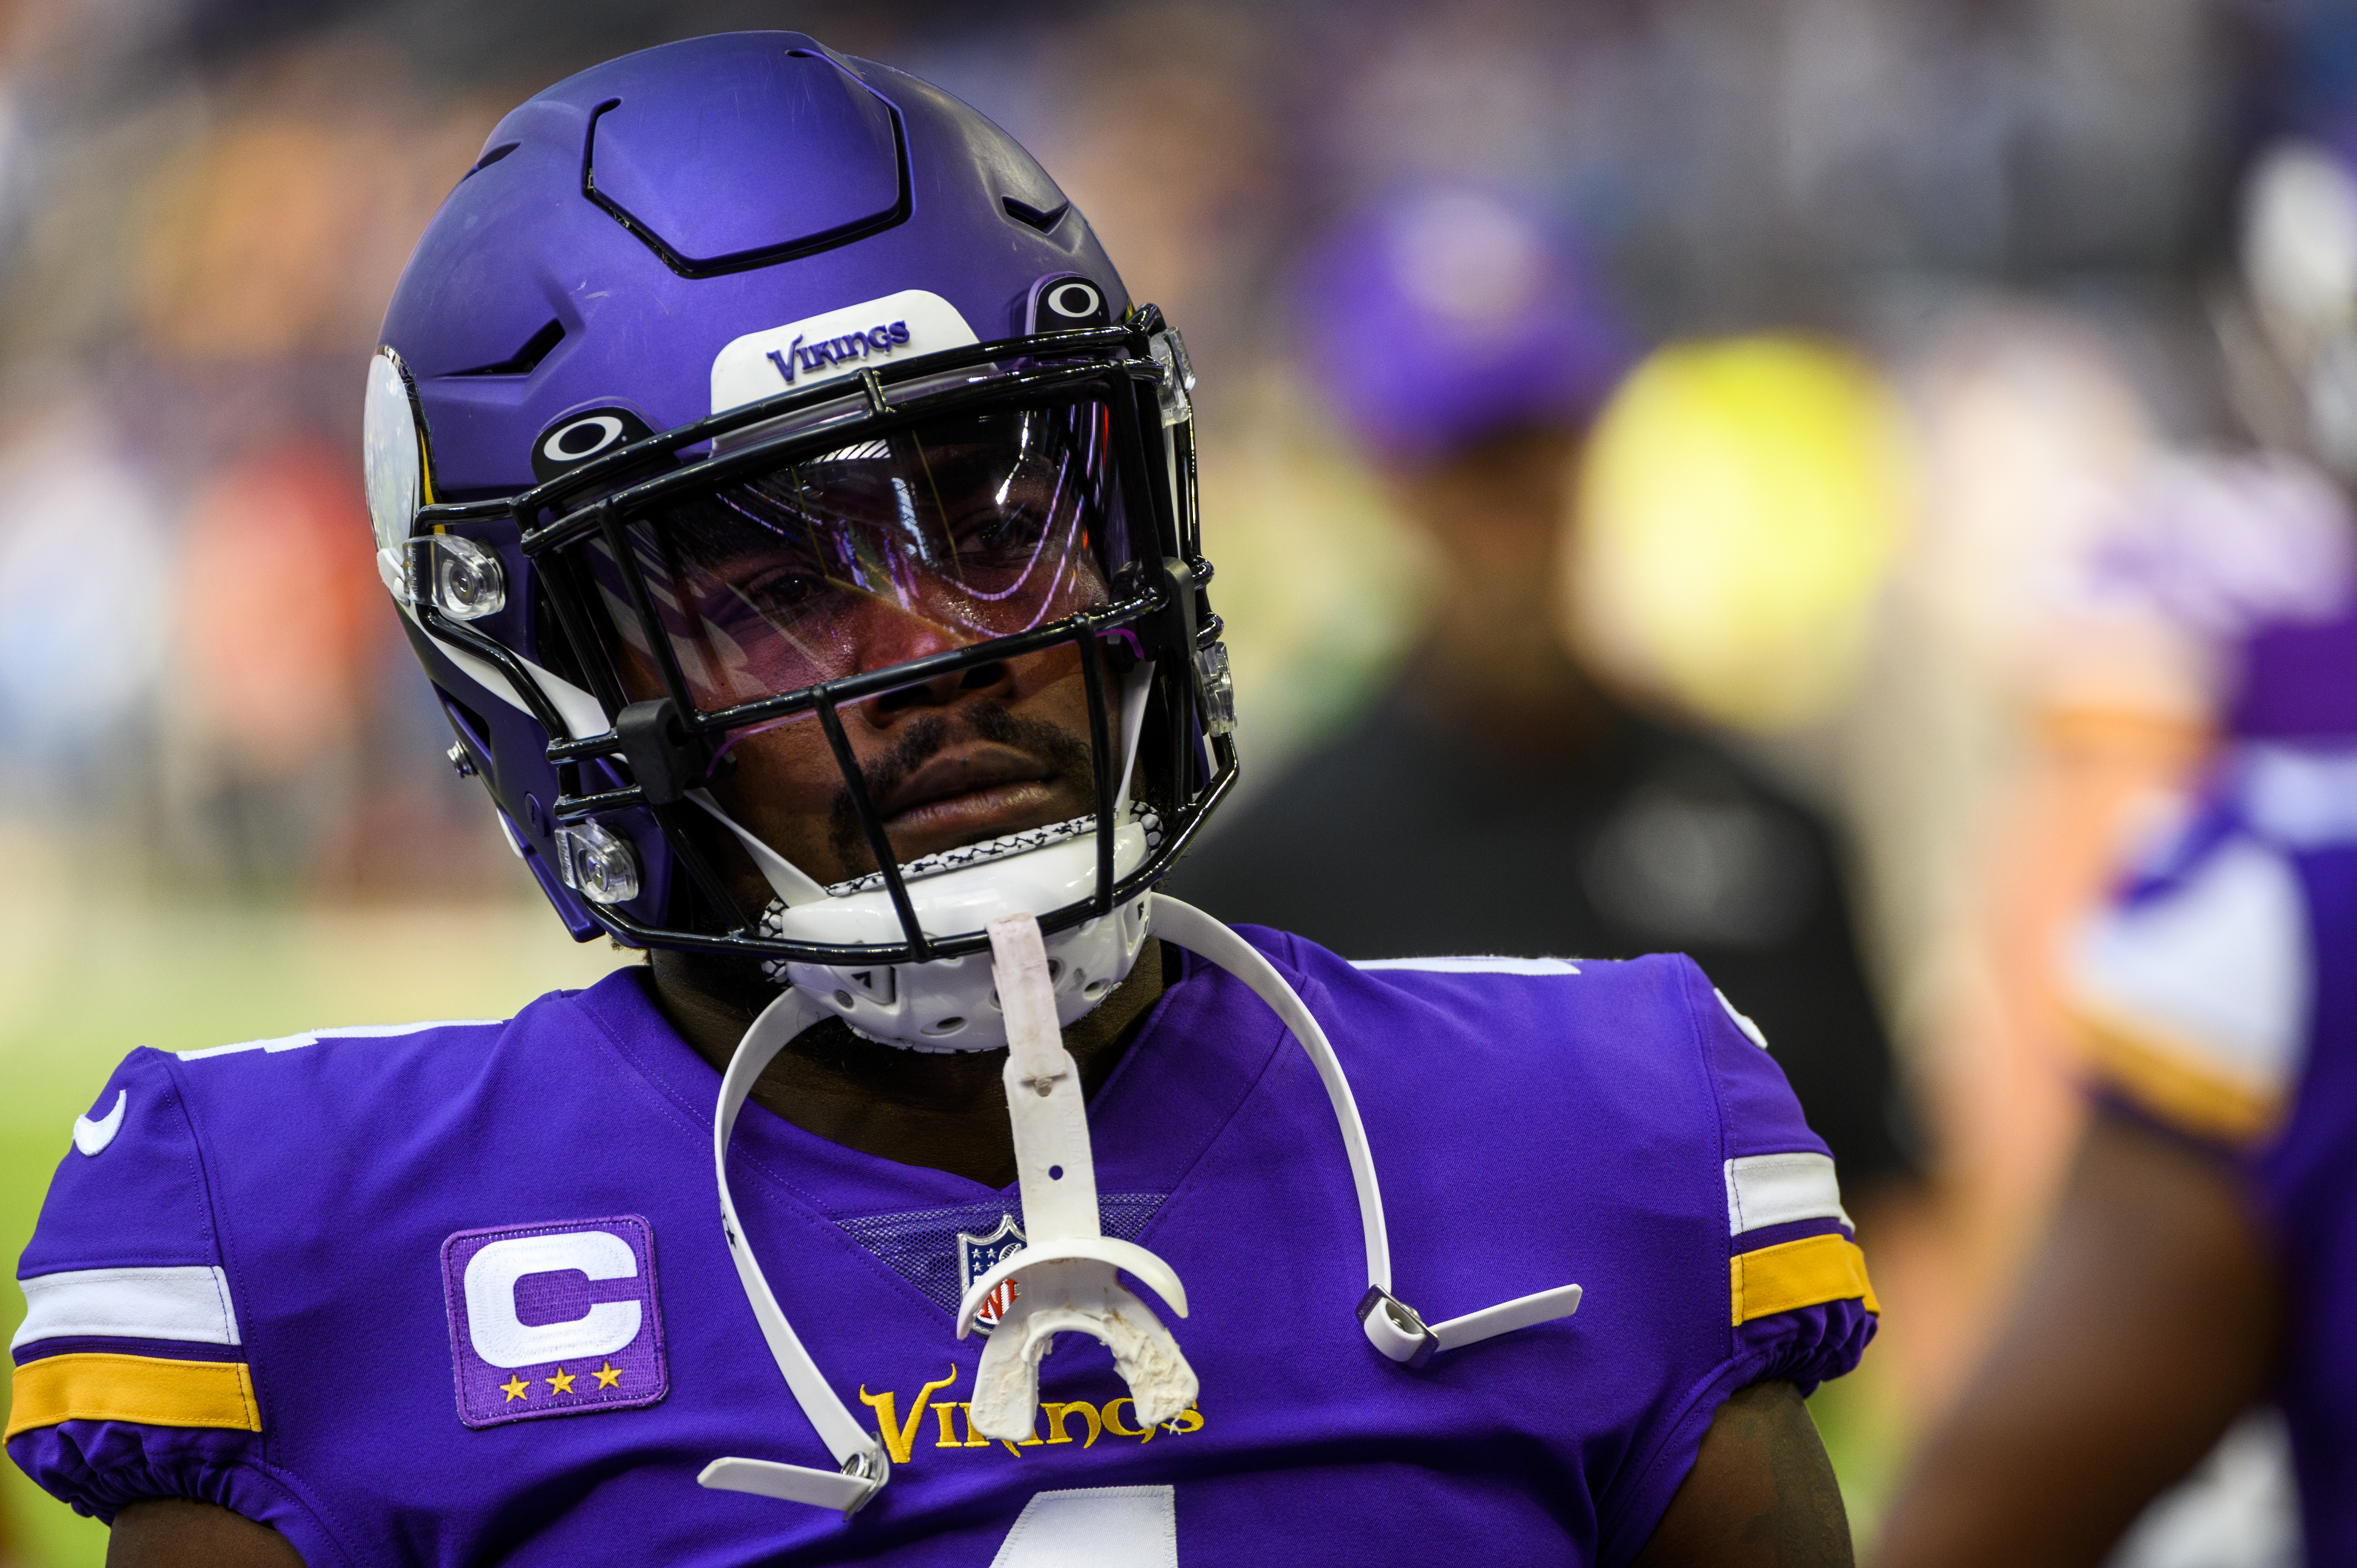 Dalvin Cook #4 of the Minnesota Vikings warms up before the game against the Detroit Lions at U.S. Bank Stadium on September 25, 2022 in Minneapolis, Minnesota.